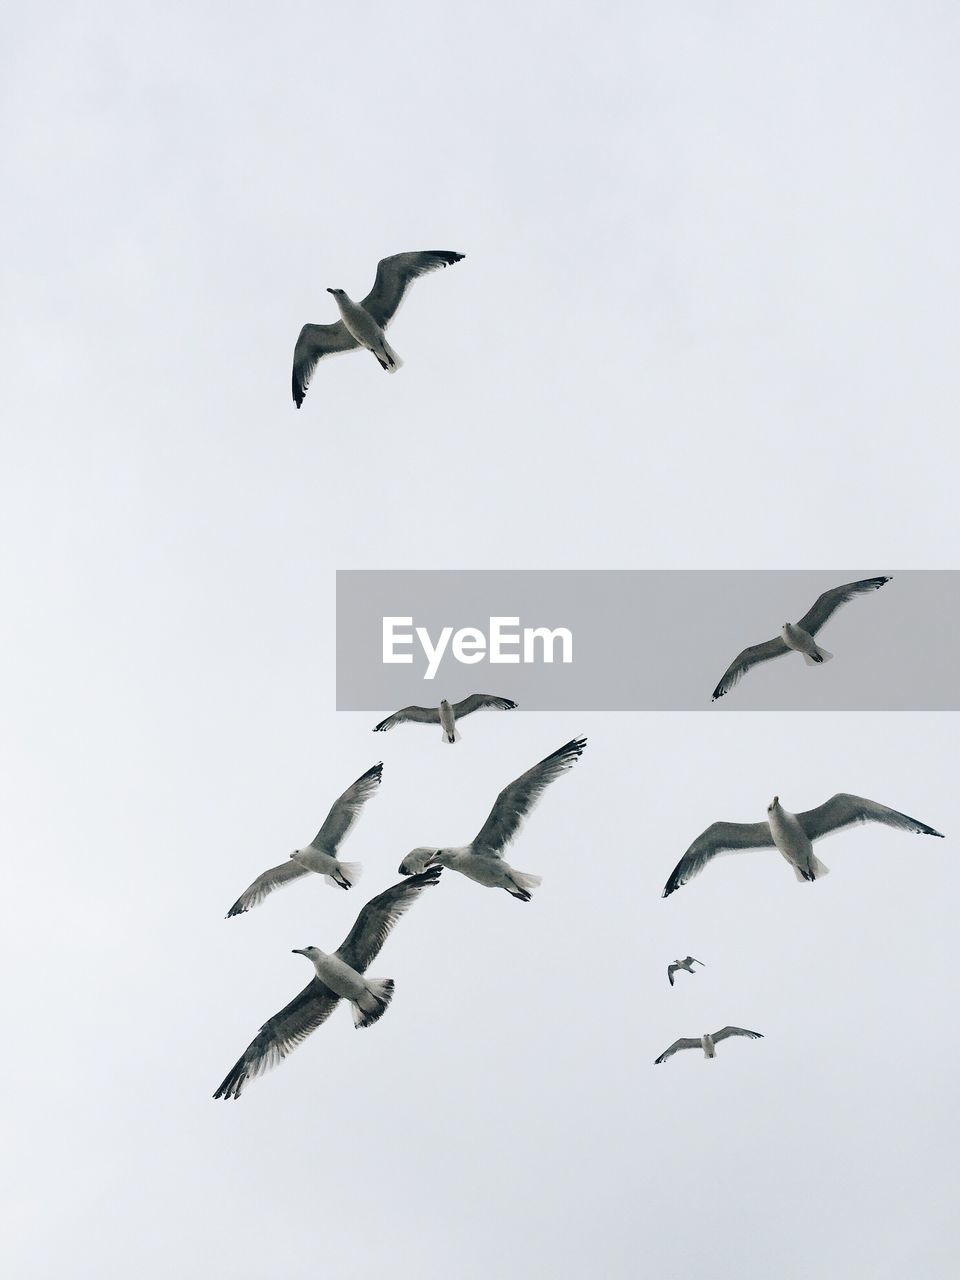 LOW ANGLE VIEW OF BIRDS AGAINST CLEAR SKY